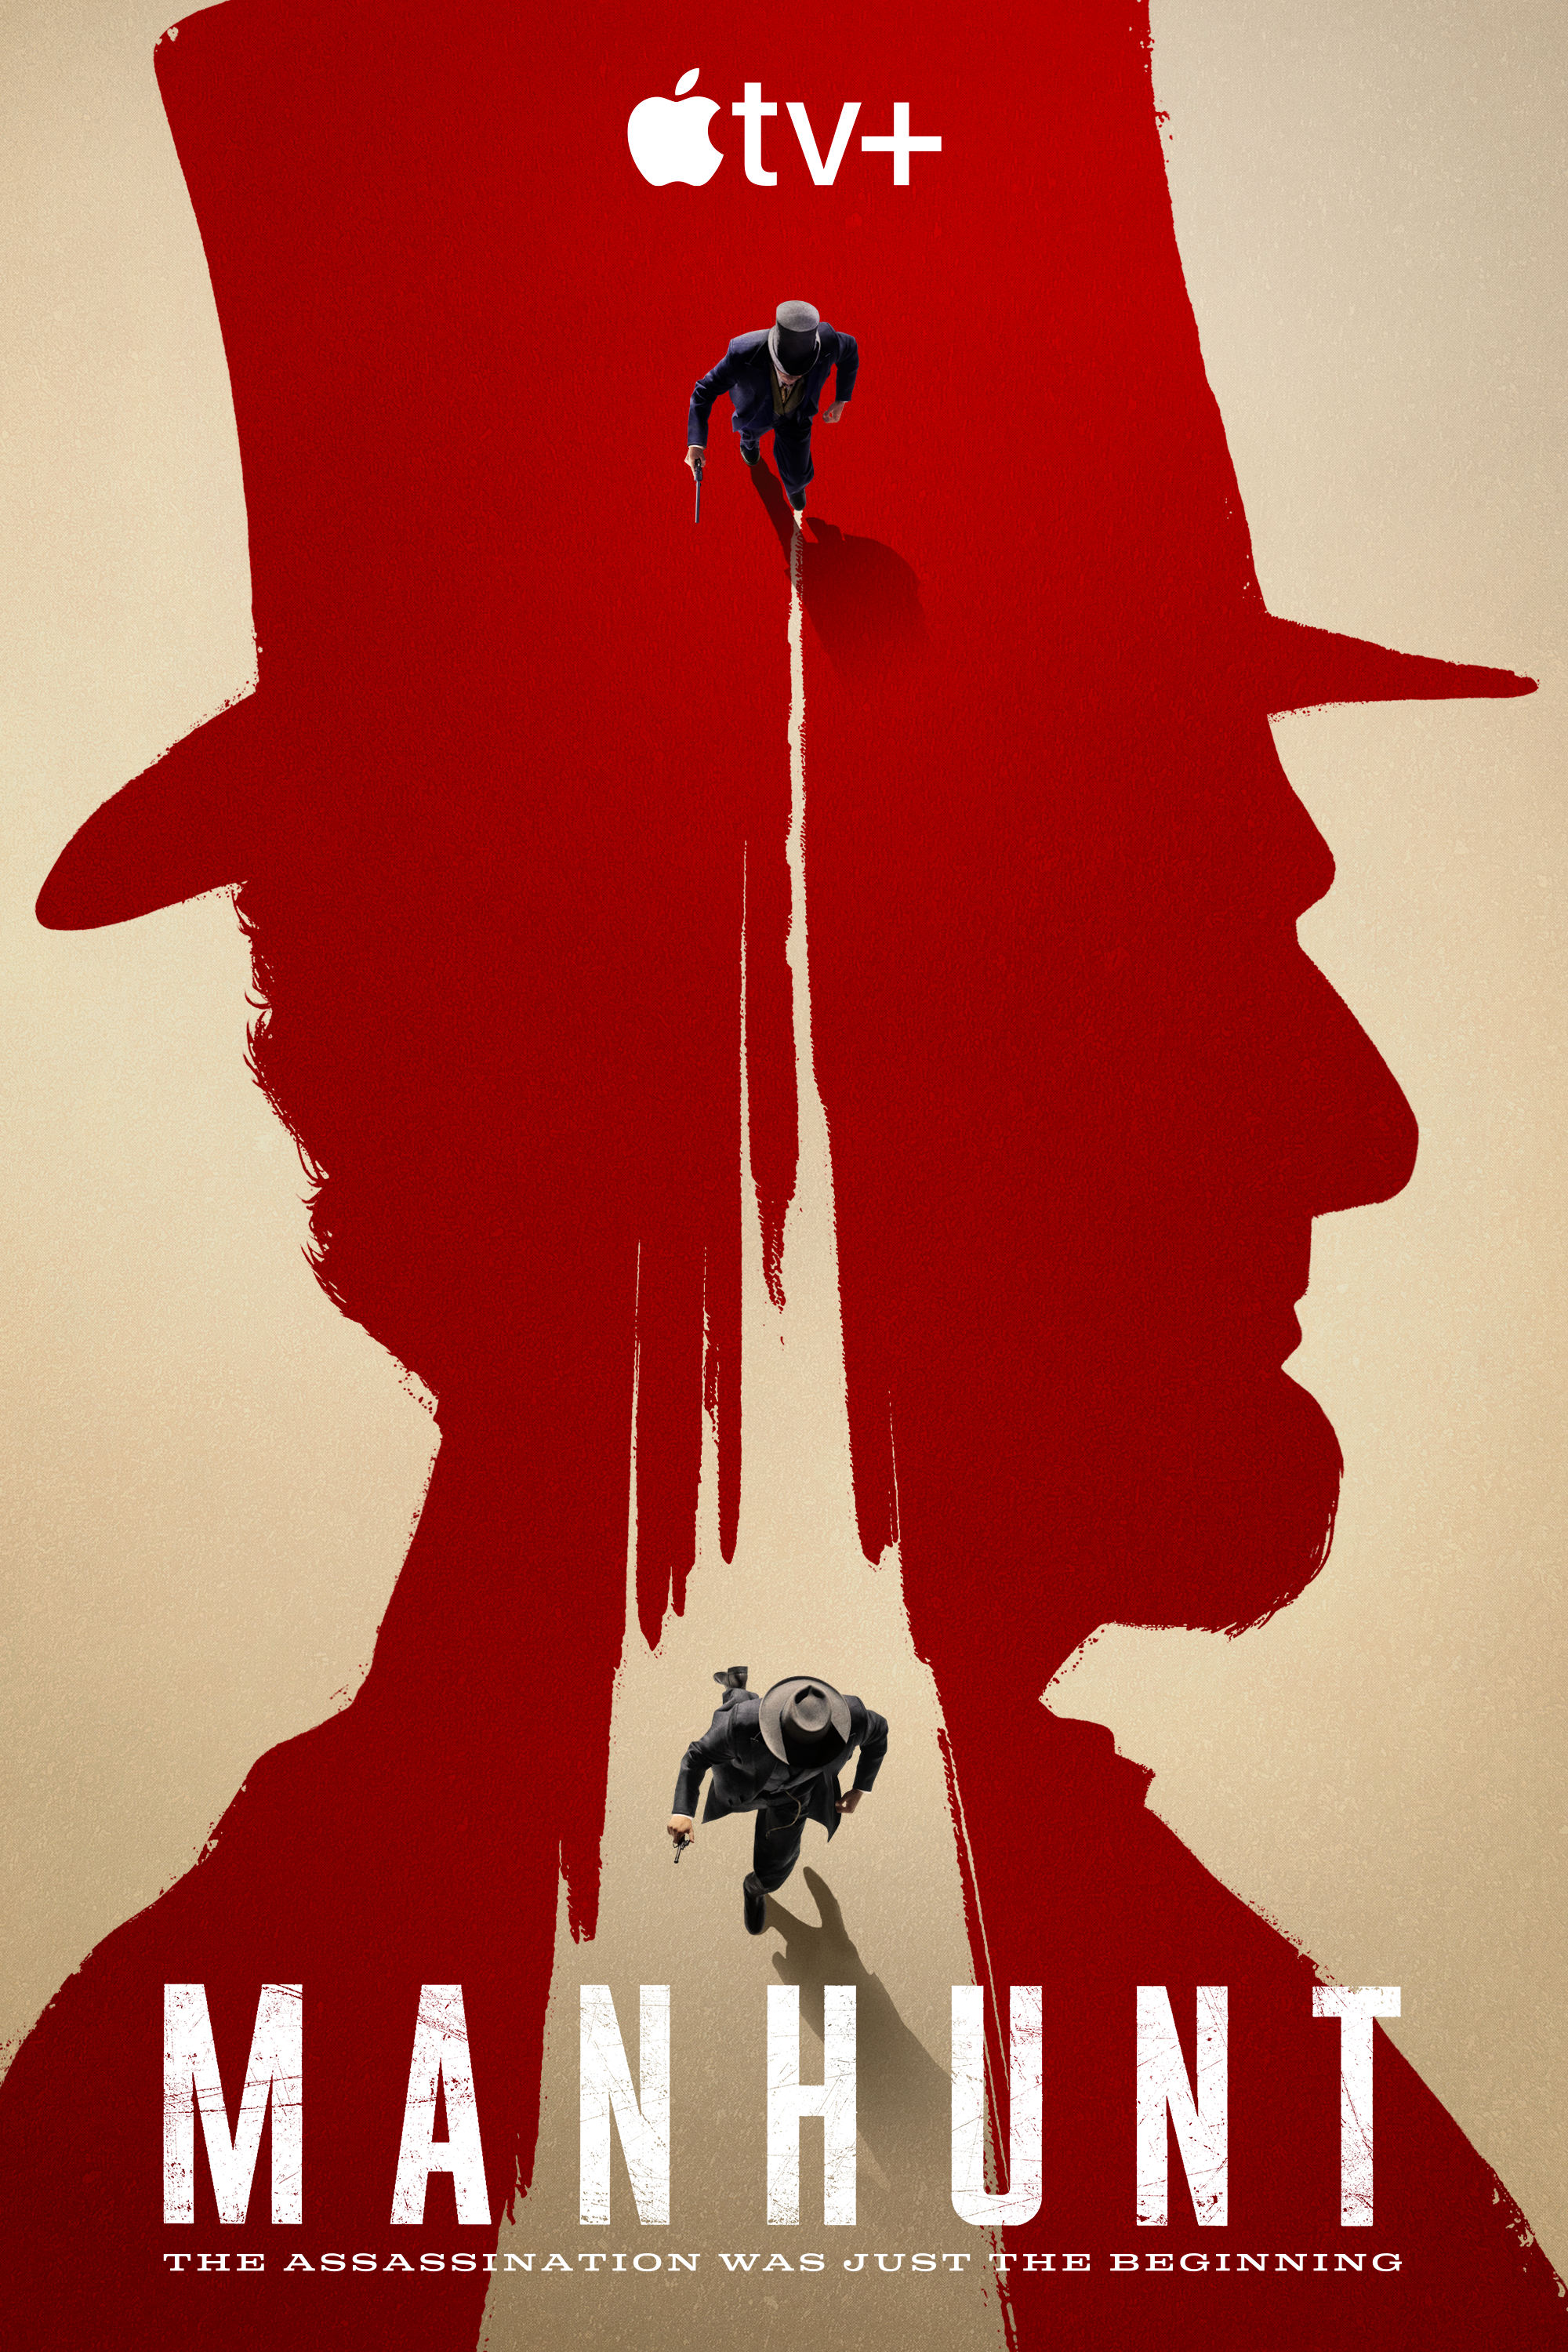 Manhunt TV Show Poster Showing a Man Running after John Wilkes Booth in the Silhouette of Abraham Lincoln